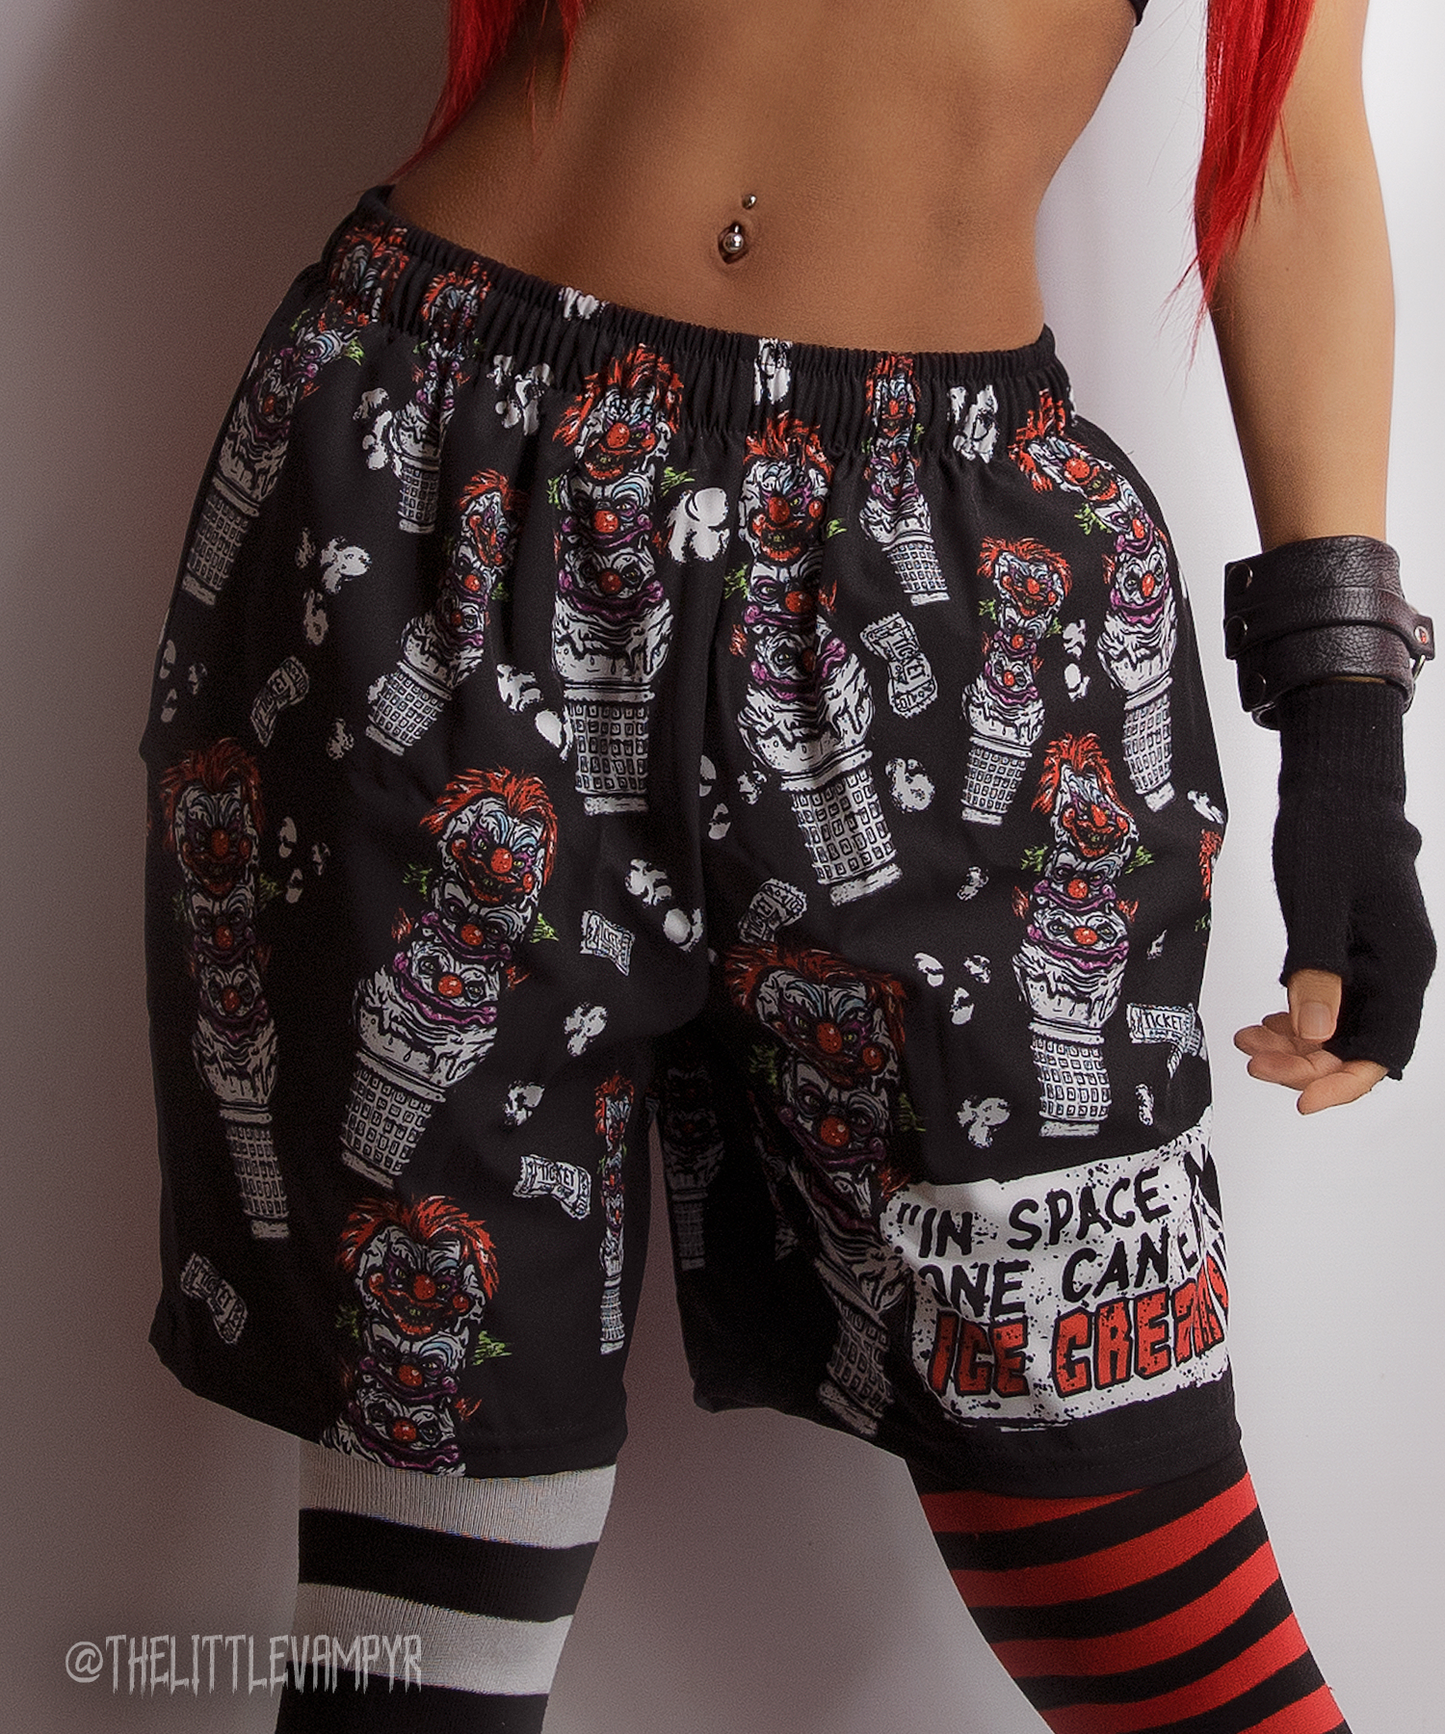 Killer Klowns From Outer Space Ice Cream Swim trunks